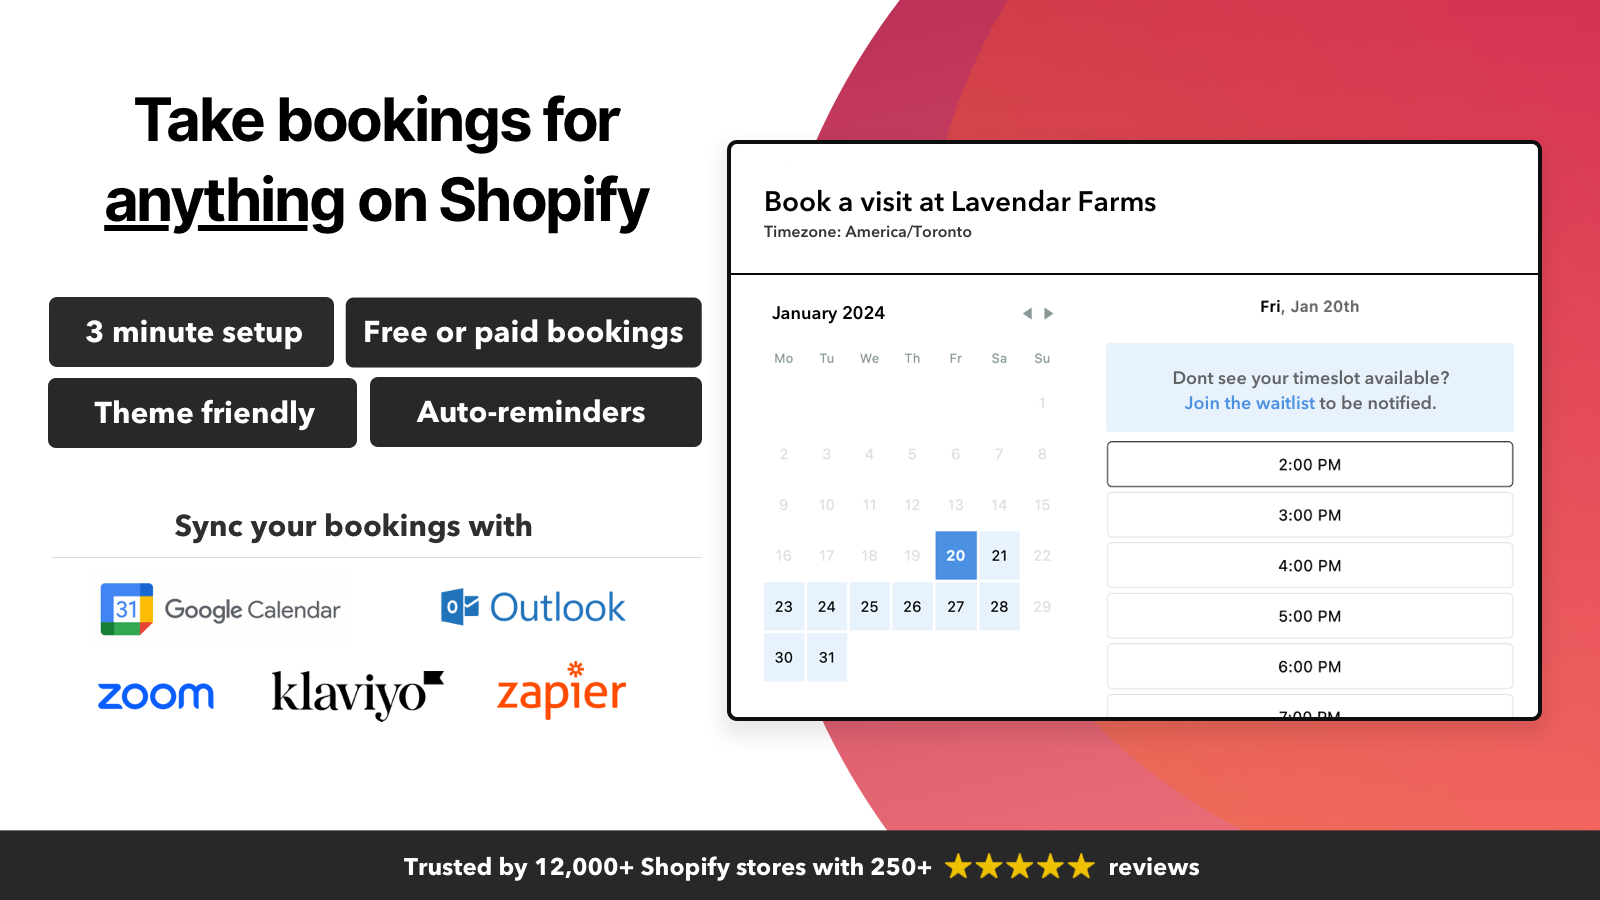 Take bookings and appointments for anything on Shopify. 